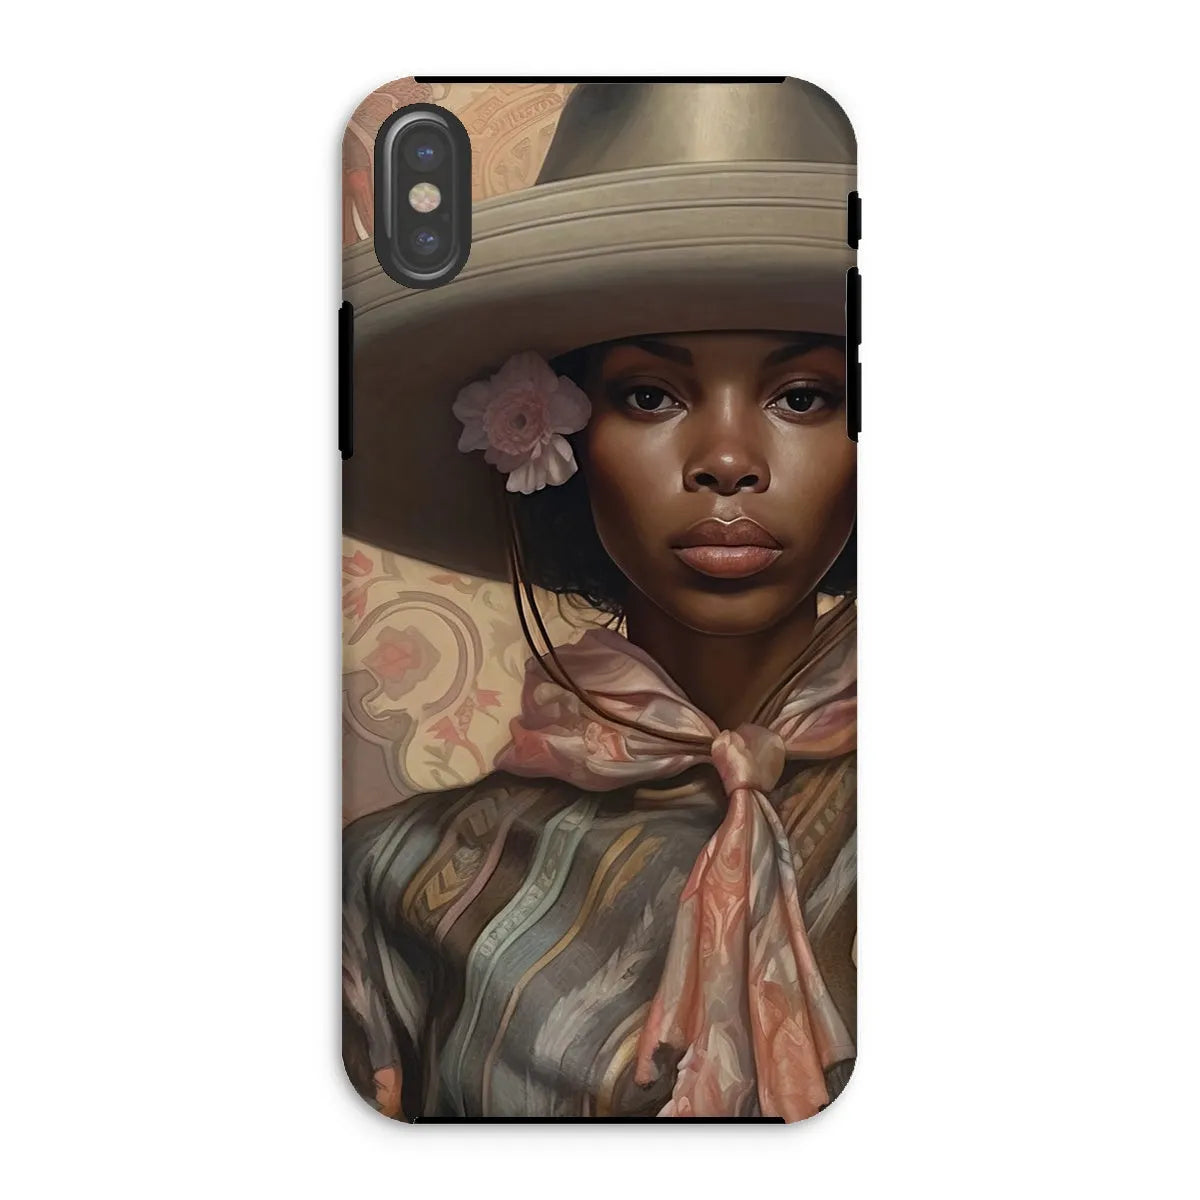 Sadie The Lesbian Cowgirl - Sapphic Art Phone Case - Iphone Xs / Matte - Mobile Phone Cases - Aesthetic Art